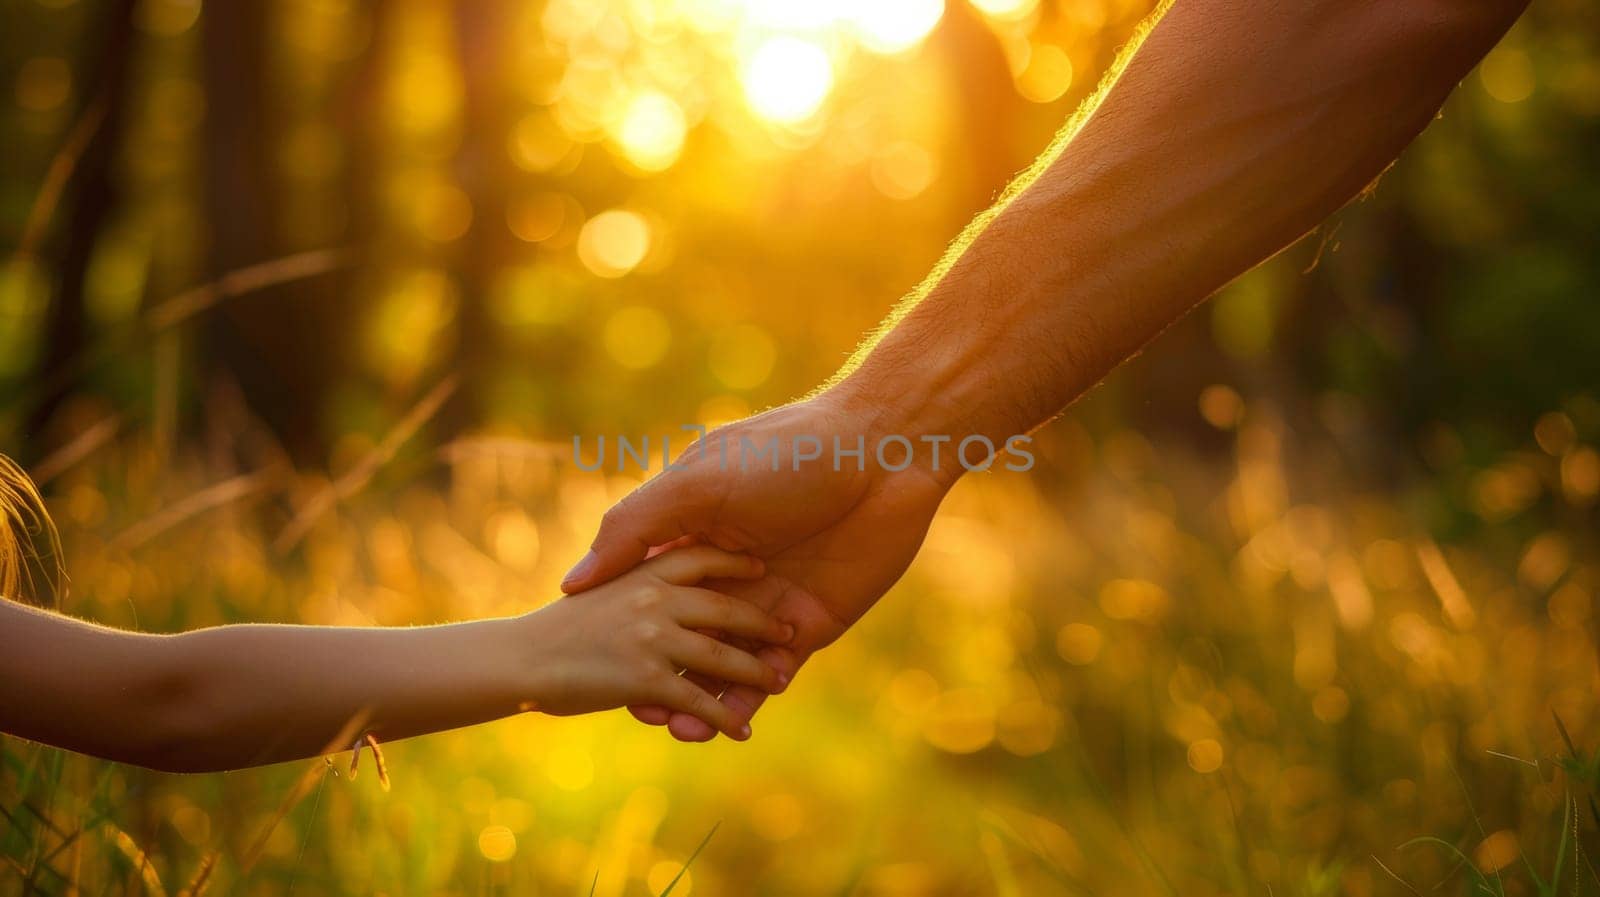 A man and a child holding hands in the grass